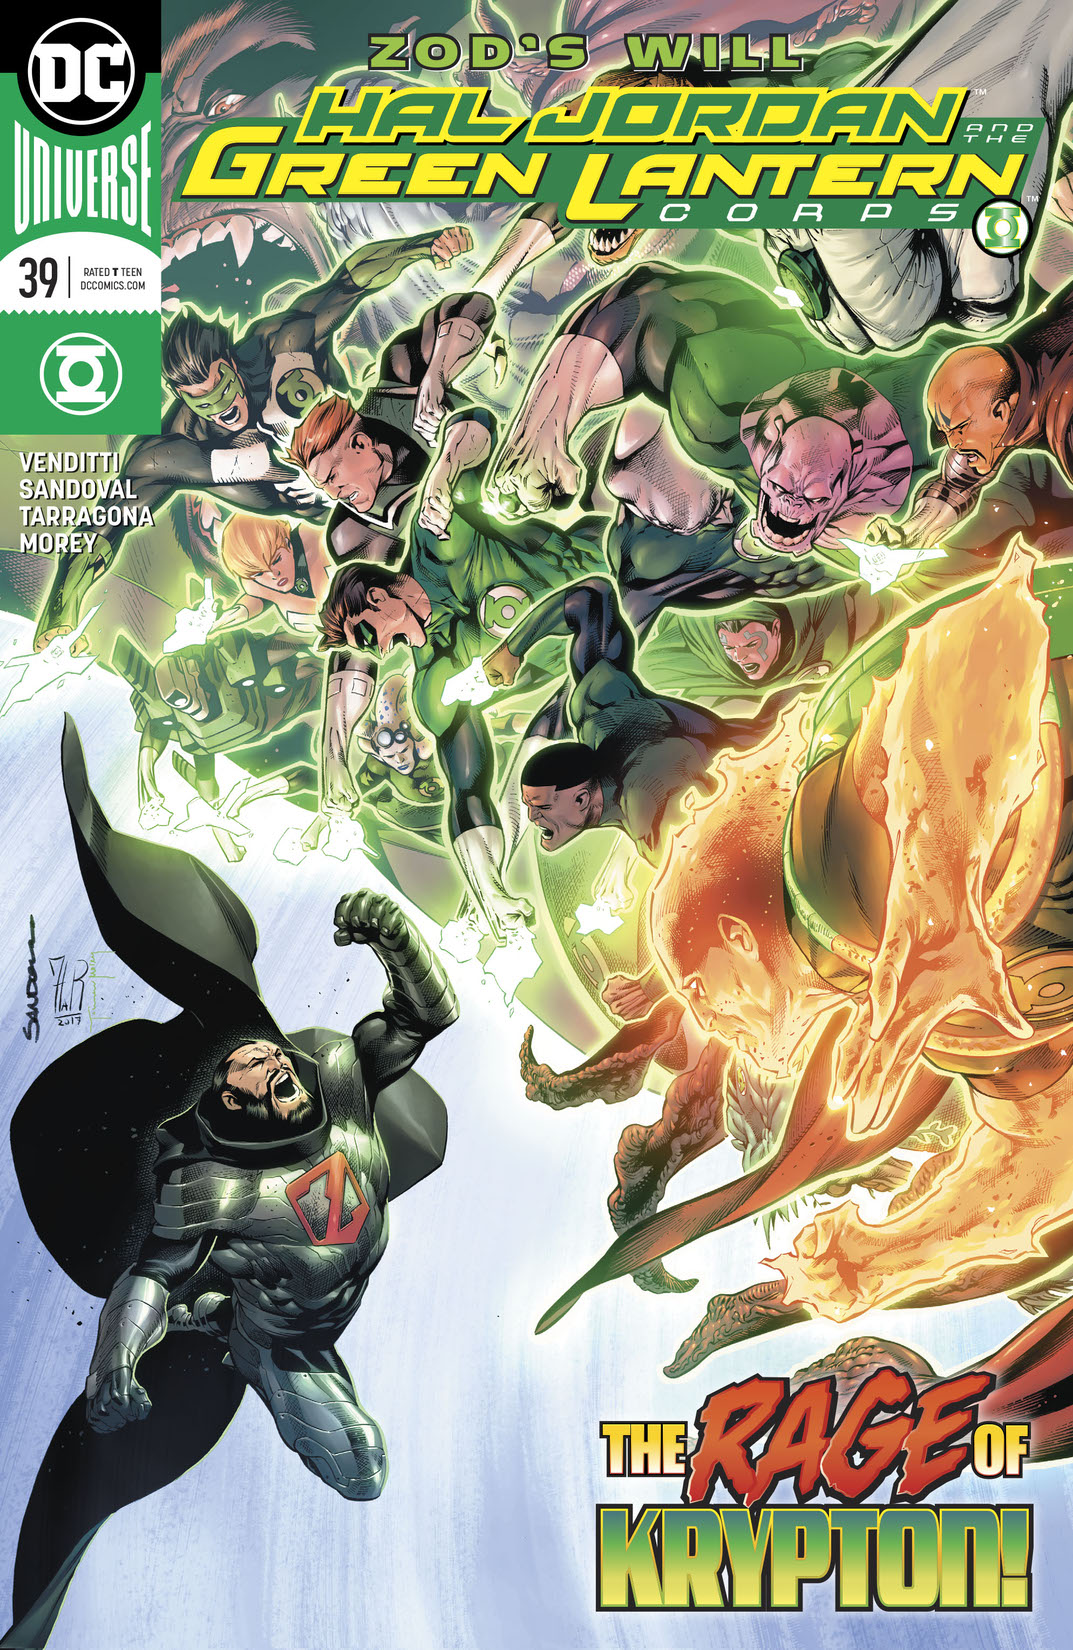 Hal Jordan and The Green Lantern Corps #39 preview images